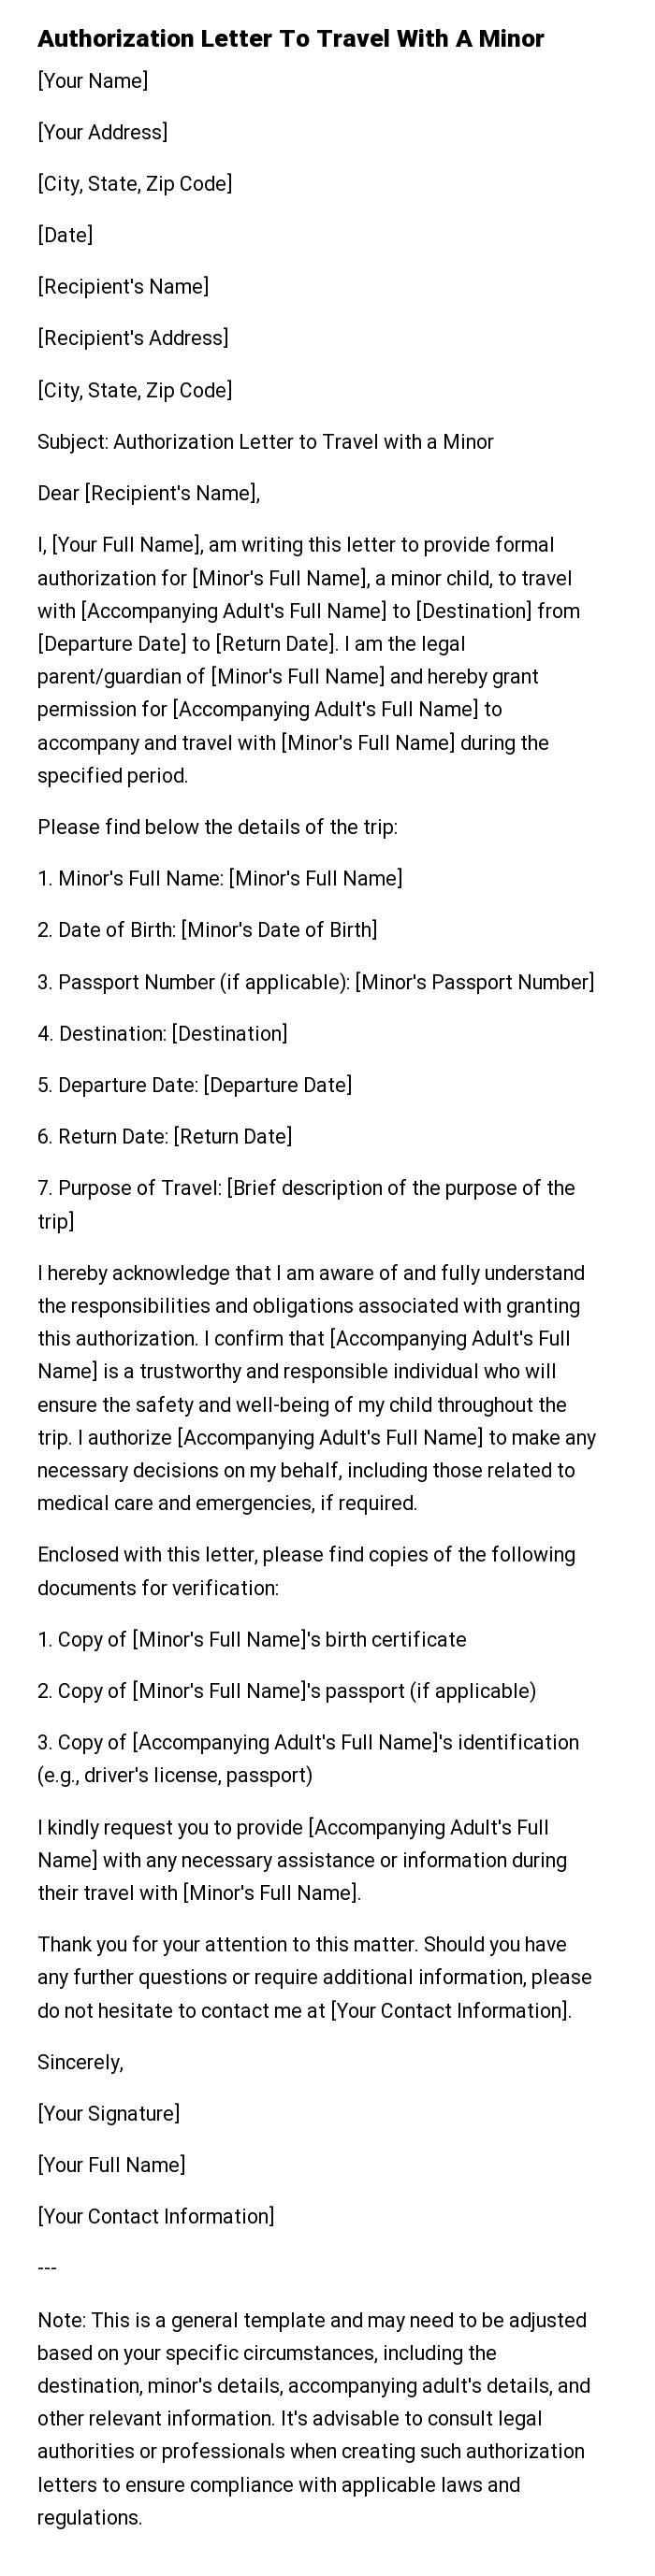 Authorization Letter To Travel With A Minor